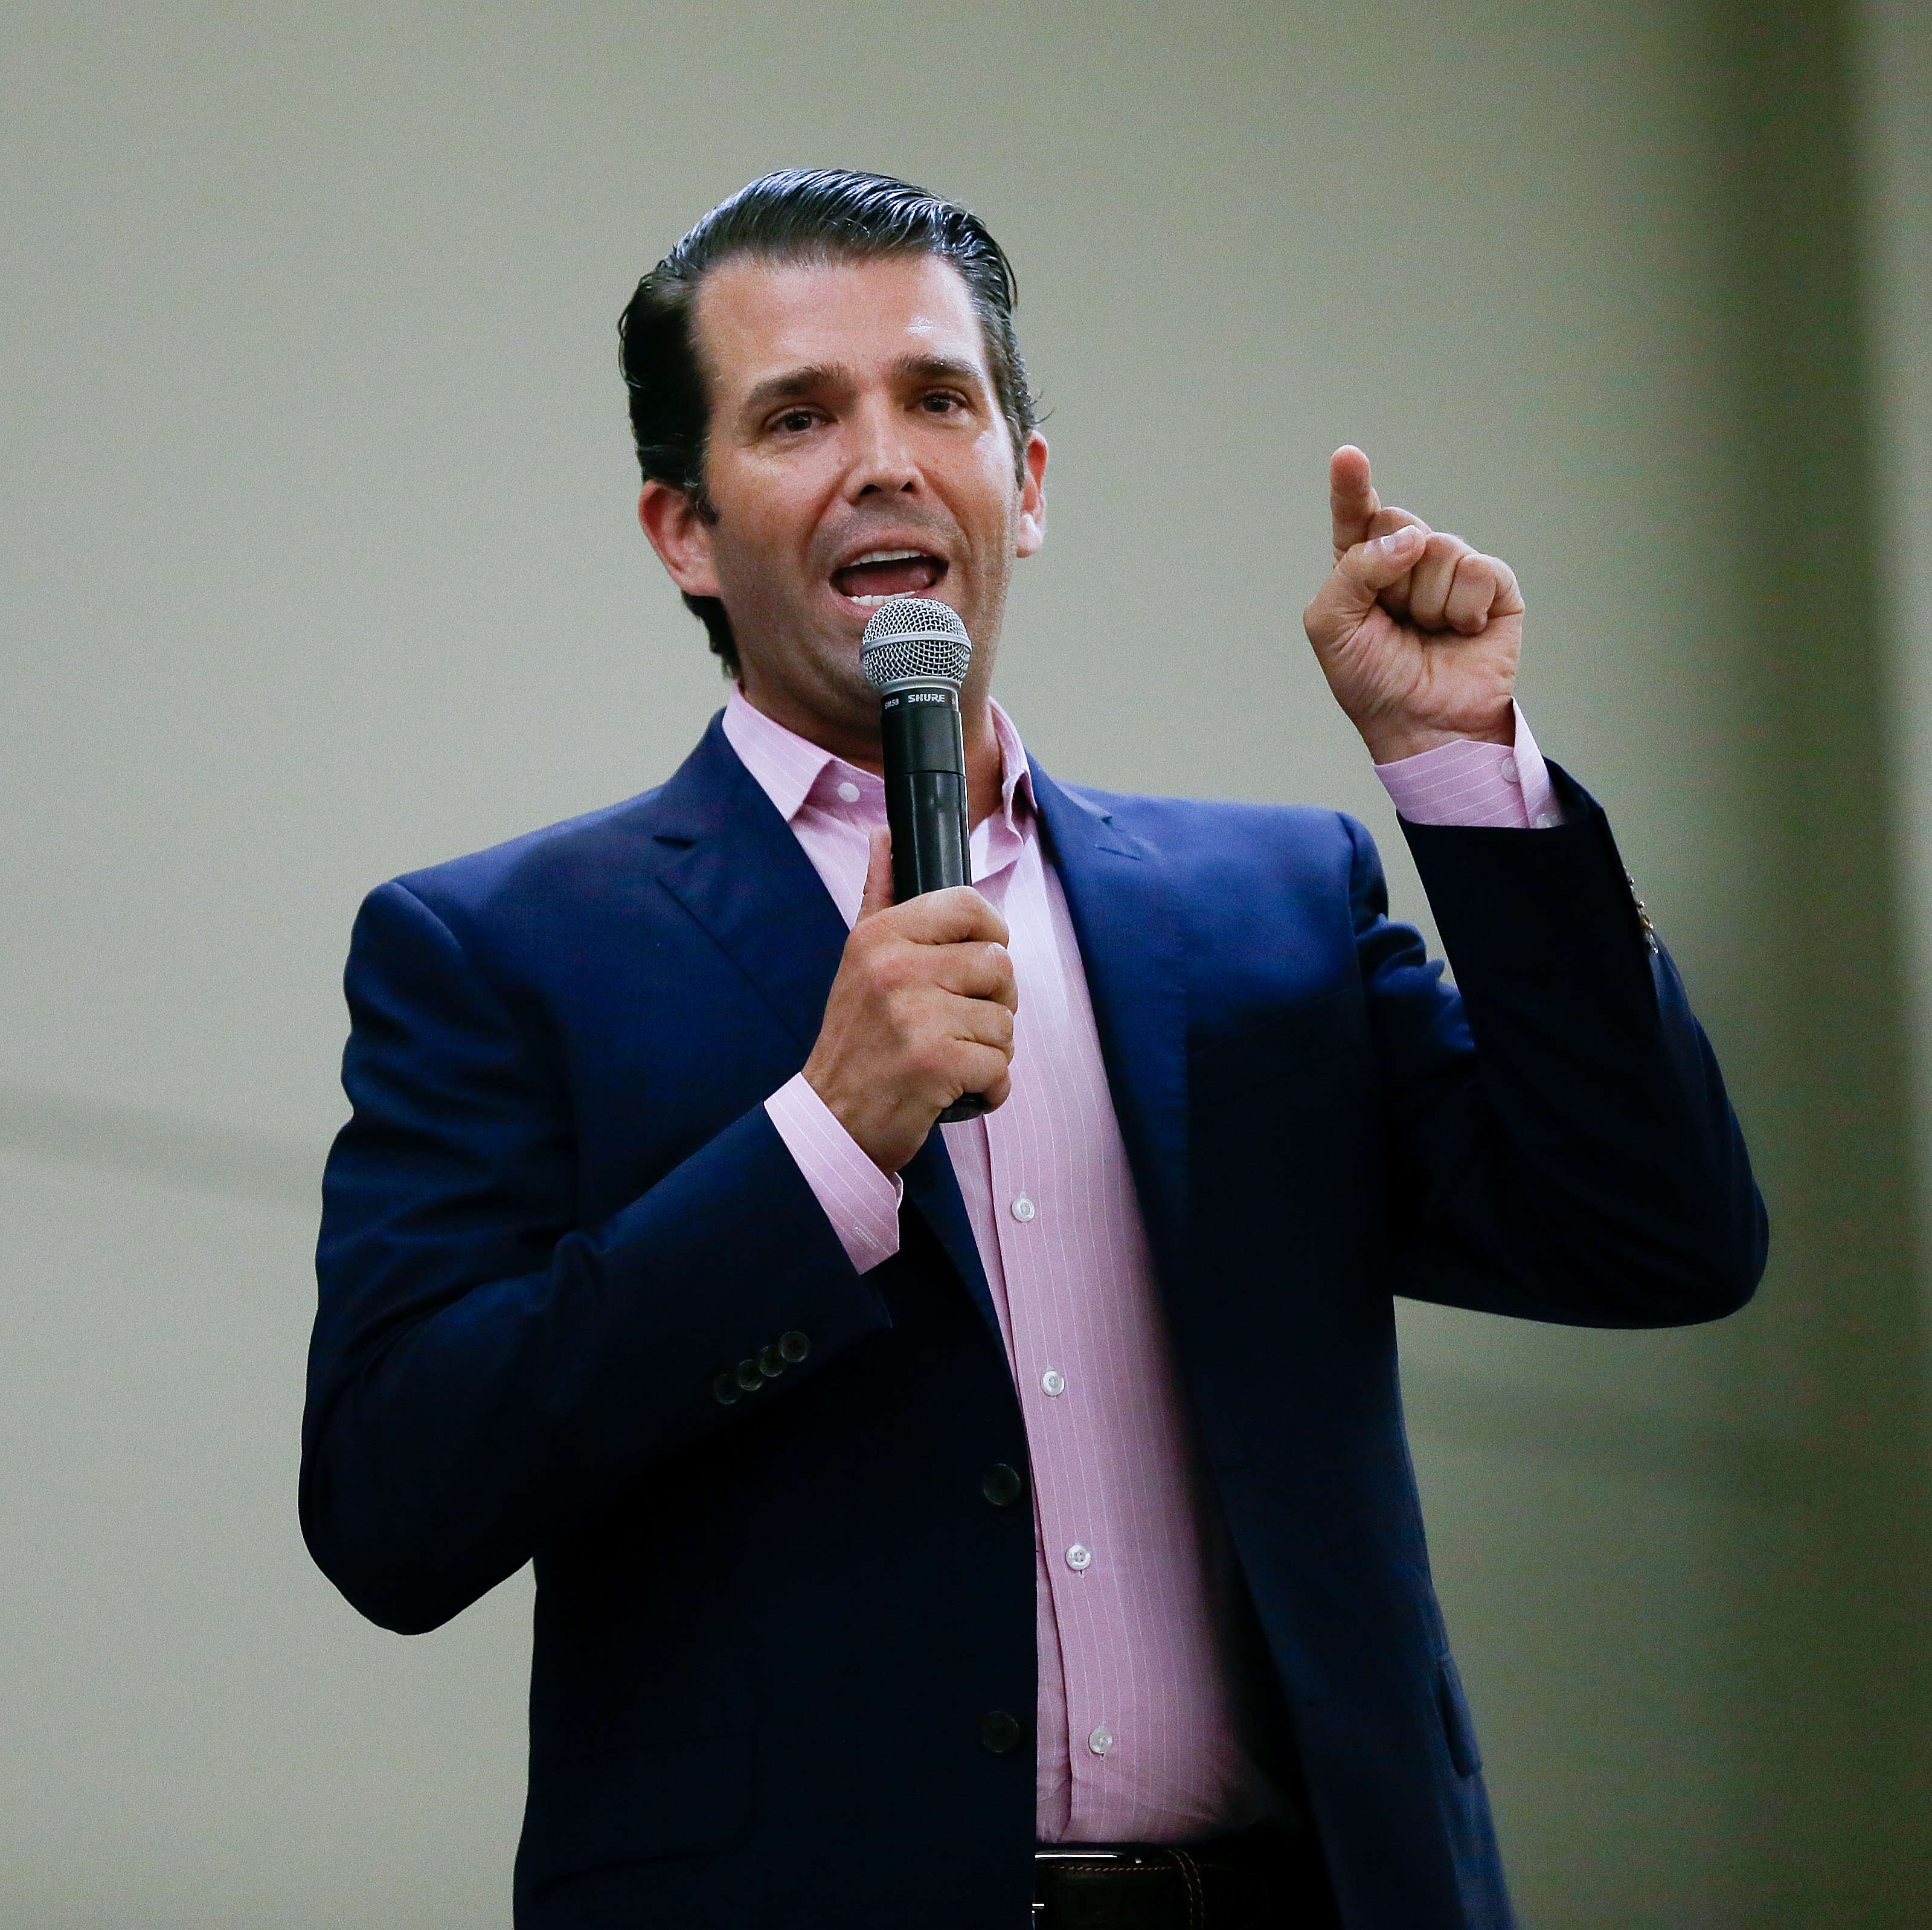 CONROE, TX - OCTOBER 03: Donald Trump Jr speaks at a Ted Cruz Rally at the Lone Star Convention Center on October 3, 2018 in Conroe, Texas. (Photo by Bob Levey/Getty Images for Left/Right TV)